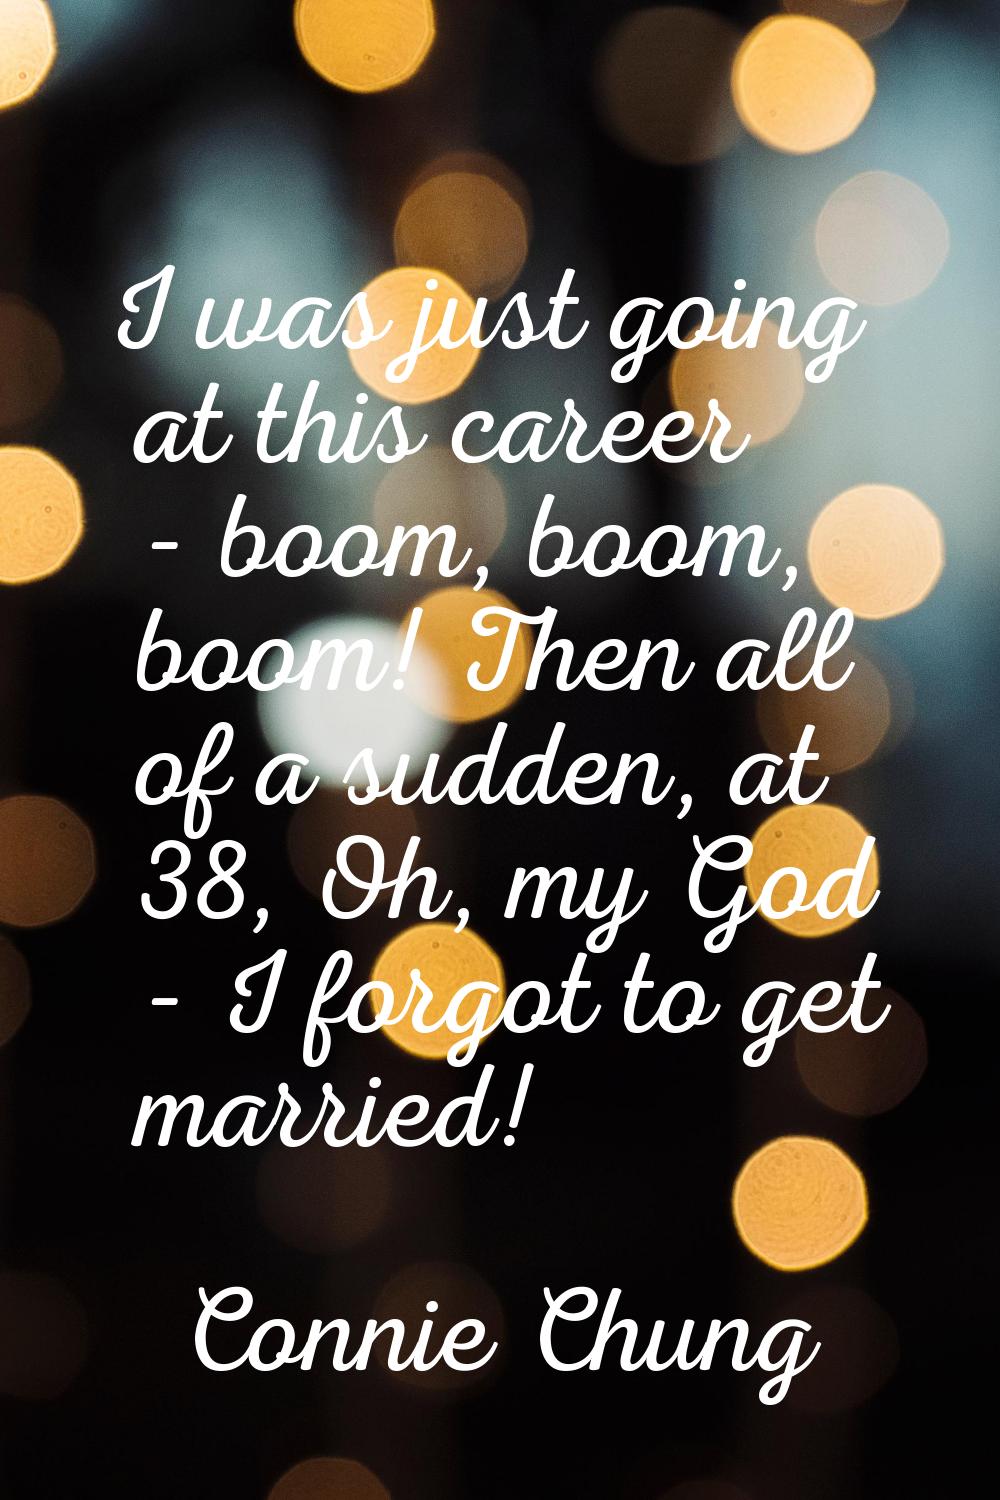 I was just going at this career - boom, boom, boom! Then all of a sudden, at 38, Oh, my God - I for